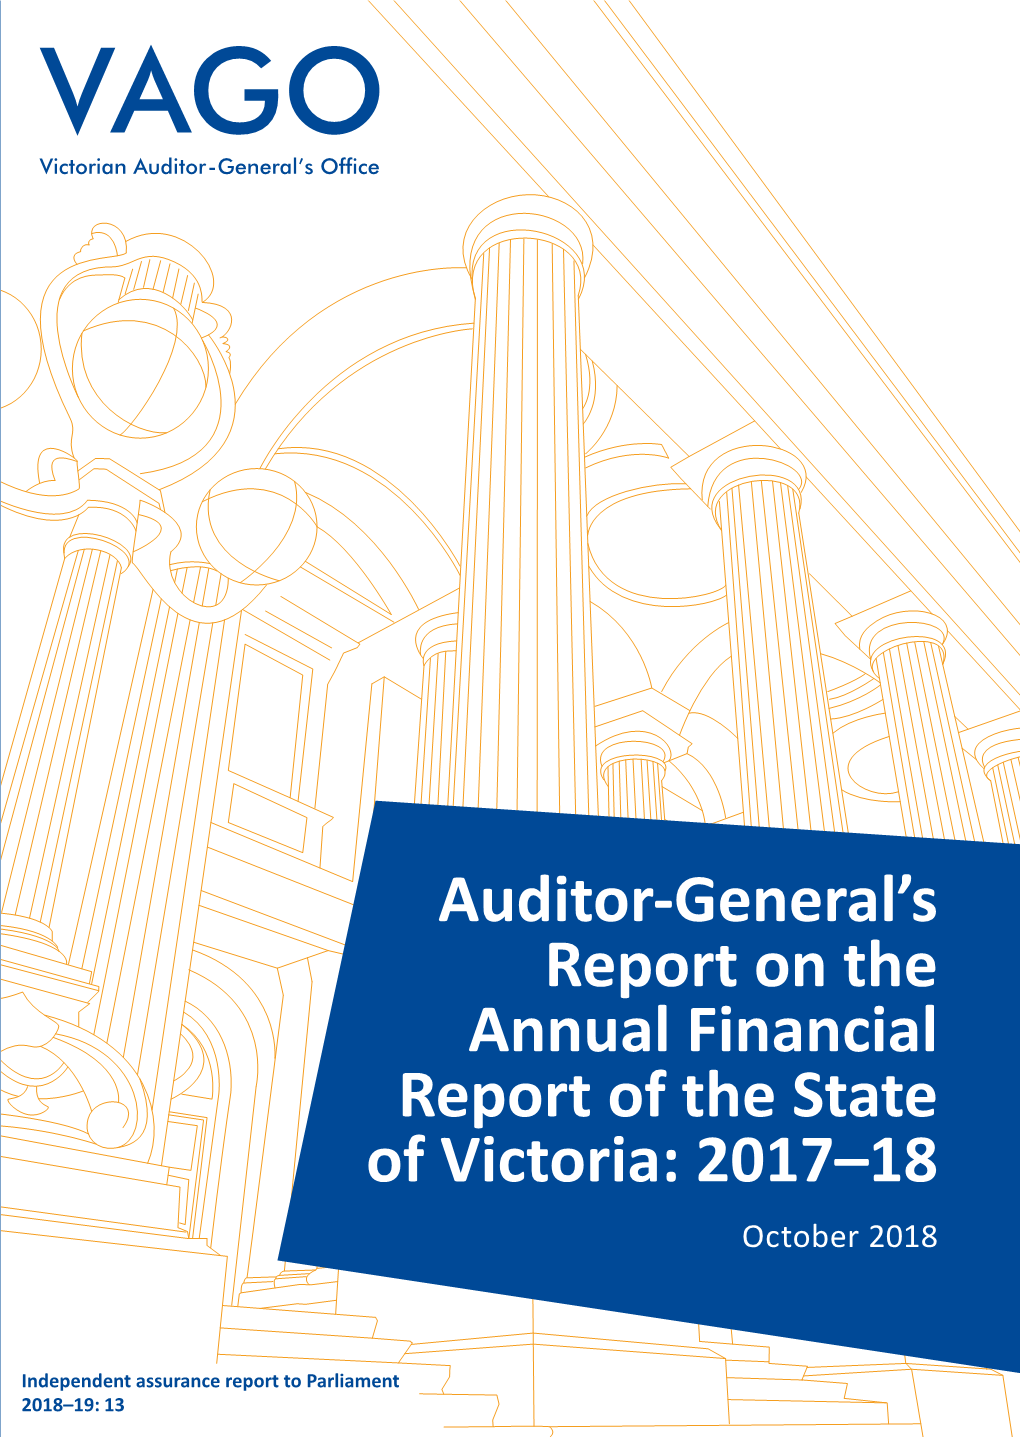 Auditor-General's Report on the Annual Financial Report of The